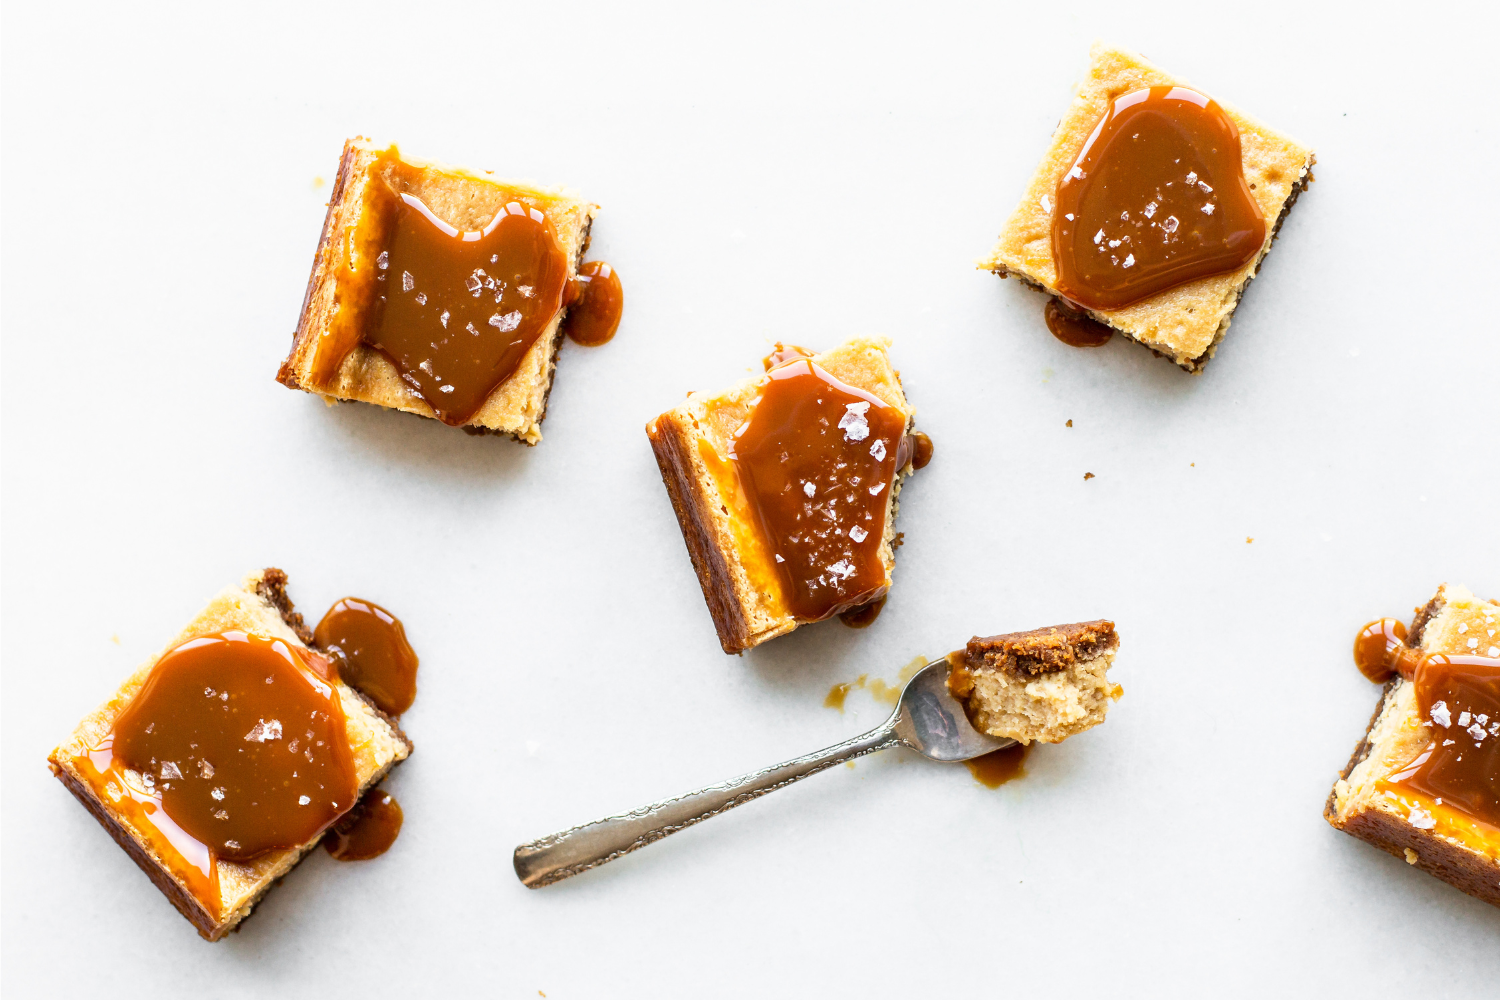 slices of salted caramel cheesecake, covered in salted caramel sauce